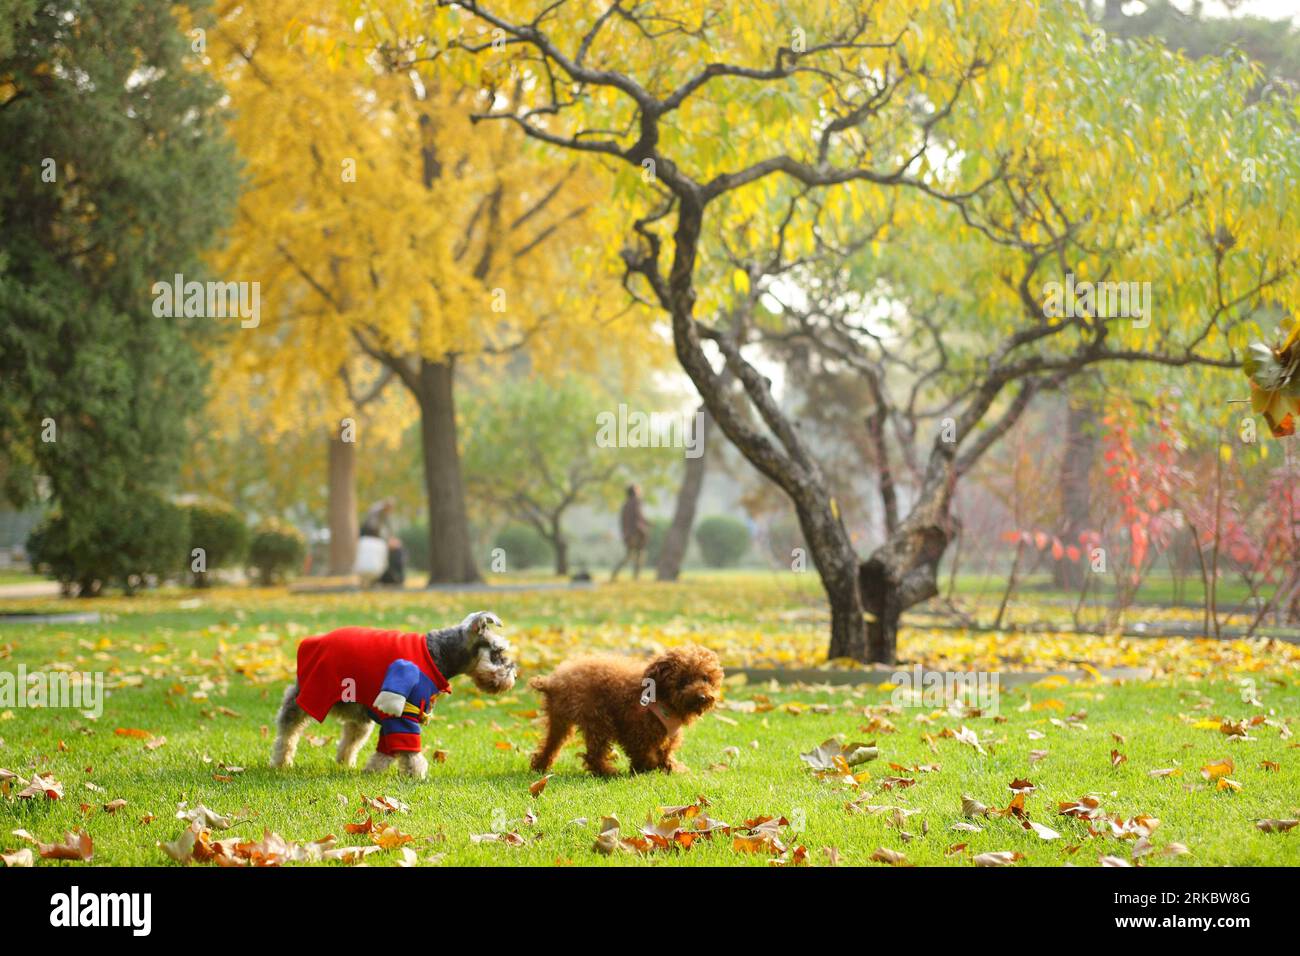 Bildnummer: 54616315  Datum: 06.11.2010  Copyright: imago/Xinhua (101106) -- BEIJING, Nov. 6, 2010 (Xinhua) -- Pet dogs walk on the lawn in a street park in Beijing, capital of China, Nov. 6, 2010. Keeping pets has become a fashion for some senior citizens in China. Some senior citizens belive that raising pets will keep them energetic and heathy both physically and mentally. (Xinhua/Zheng Huansong) (lb) CHINA-BEIJING-LIFESTYLE-SENIOR CITIZEN-PETS (CN) PUBLICATIONxNOTxINxCHN Gesellschaft kbdig xkg 2010 quer  o0 Hunde Tiere spielen Hundemode Kleidung Jahreszeit Herbst    Bildnummer 54616315 Dat Stock Photo